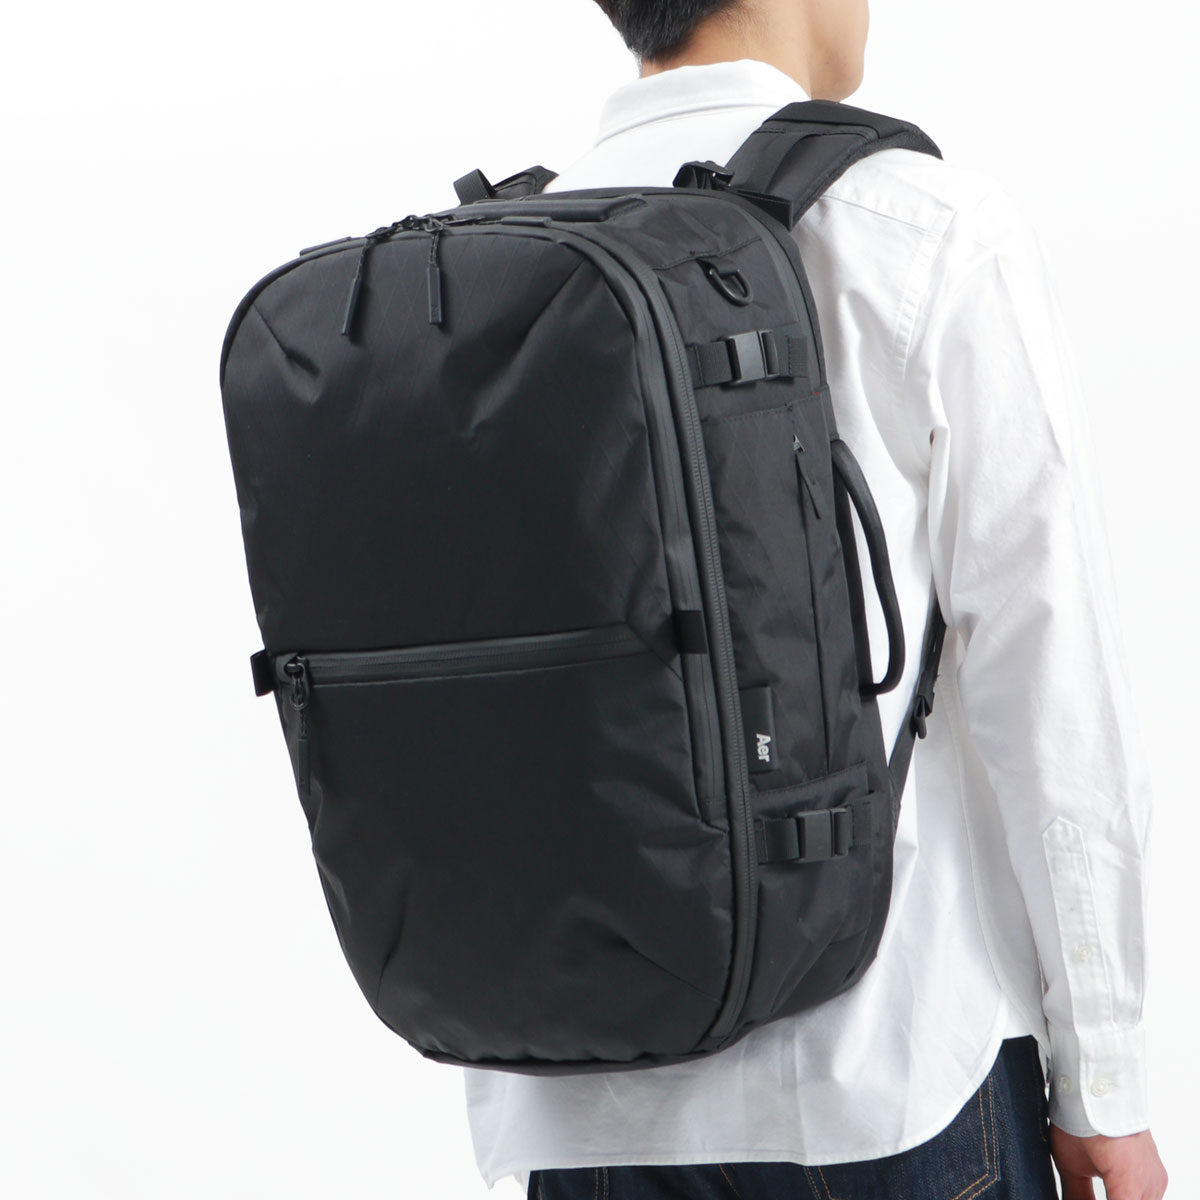 Aer Travel pack 2 x-pac バックパック